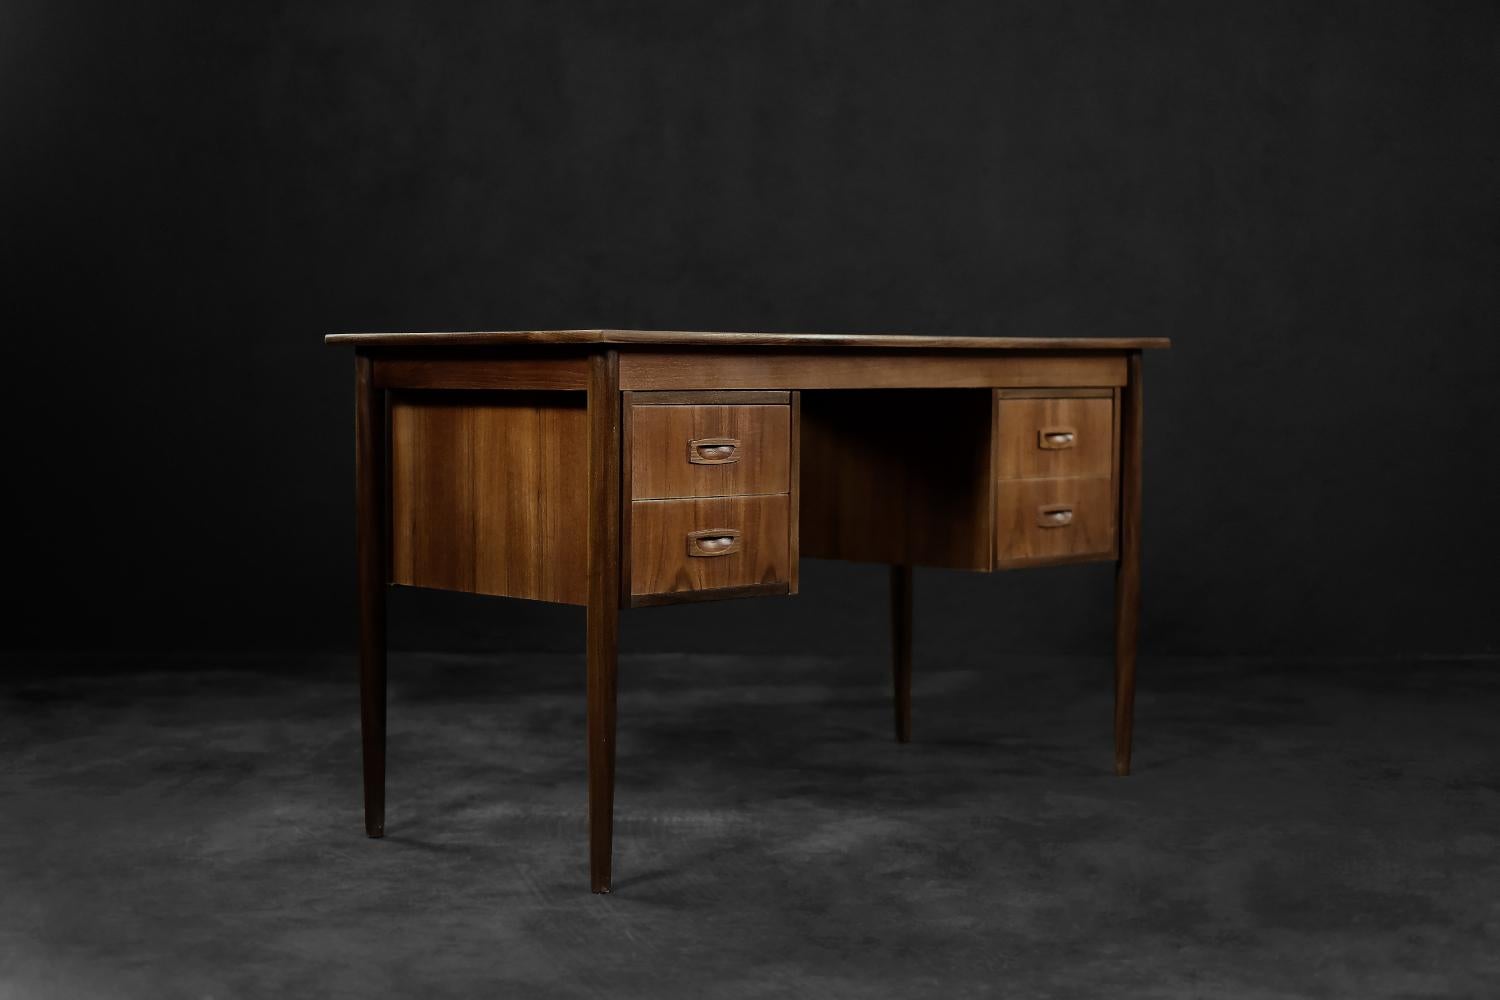 This classic desk was made in Denmark during the 1960s. It was finished of teak wood in a warm shade of brown, with visible grain detail. The desk has four drawers. Two on both sides. The slender and tall legs of the desk are made of wood. This